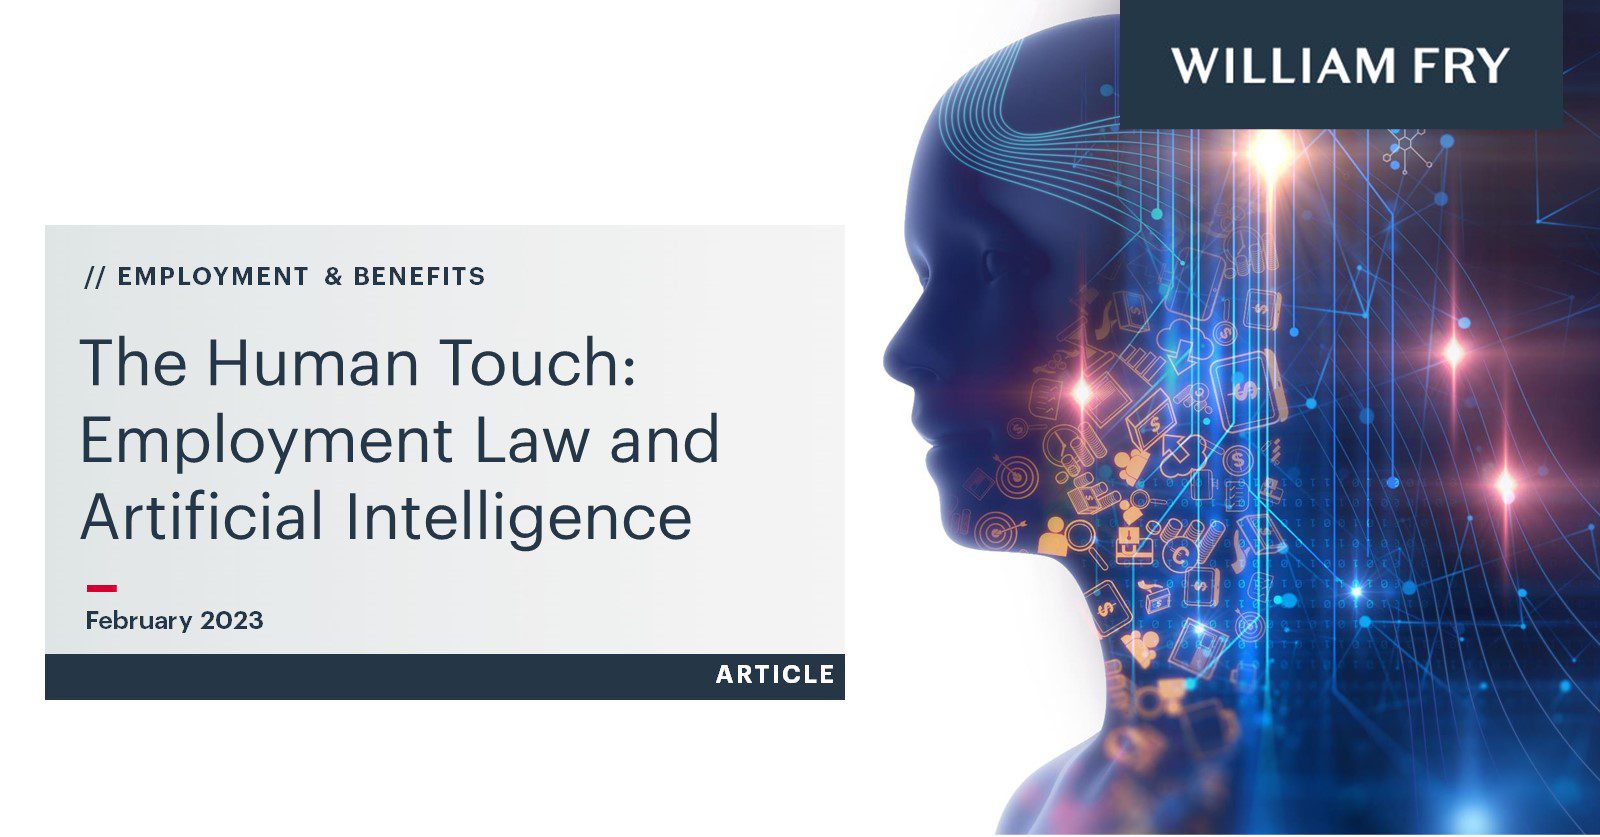 The Human Touch: Employment Law and Artificial Intelligence